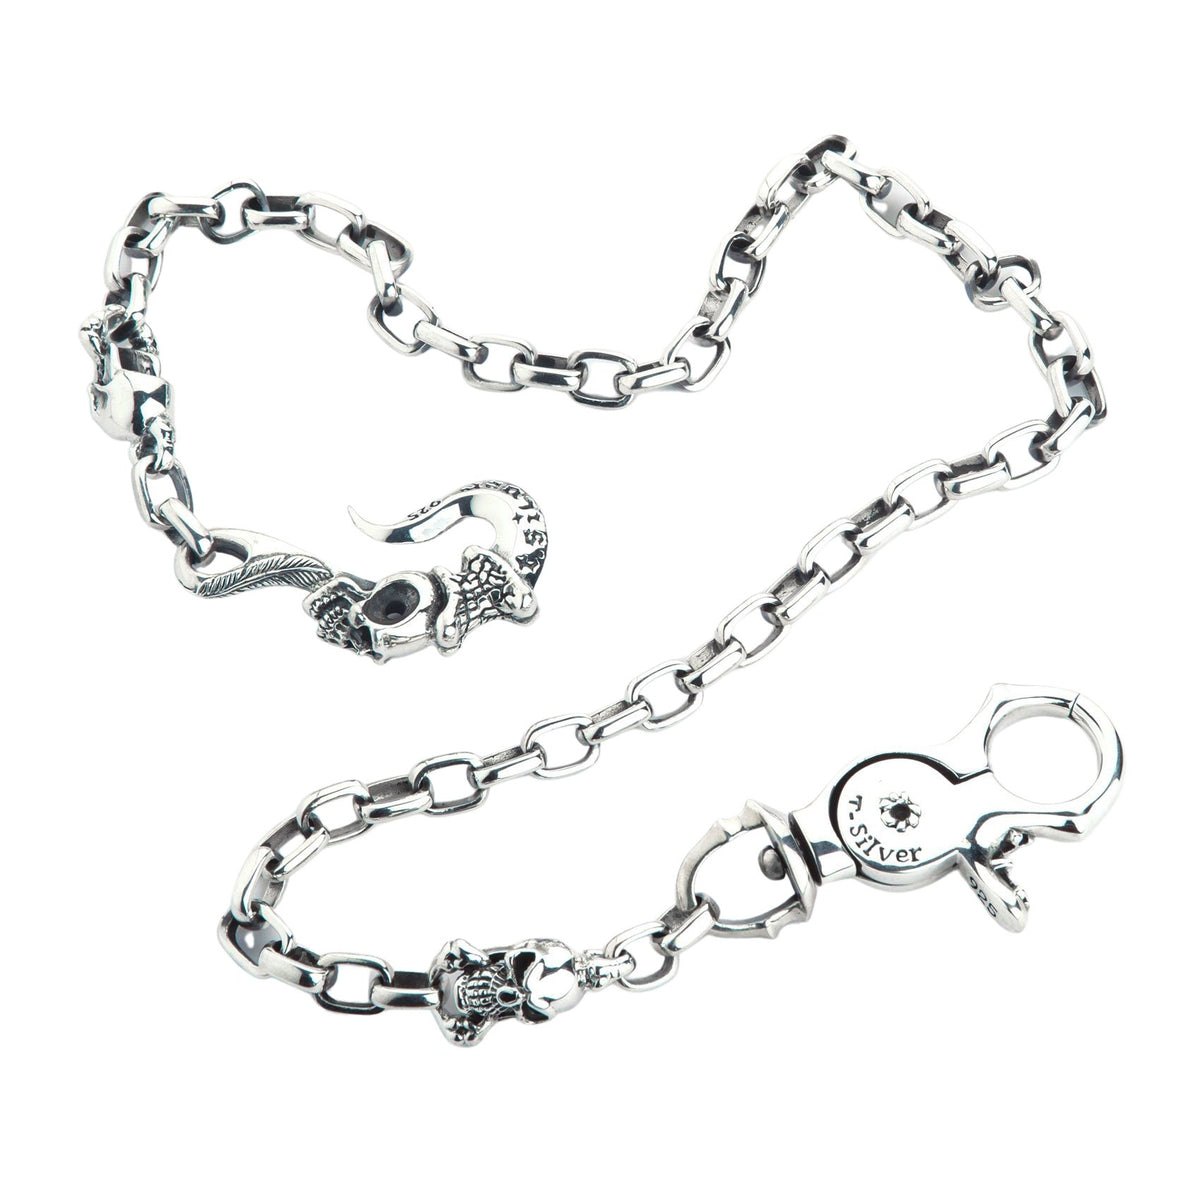 Limited edition- gothic devil vampire skull belt or wallet chain accessory!